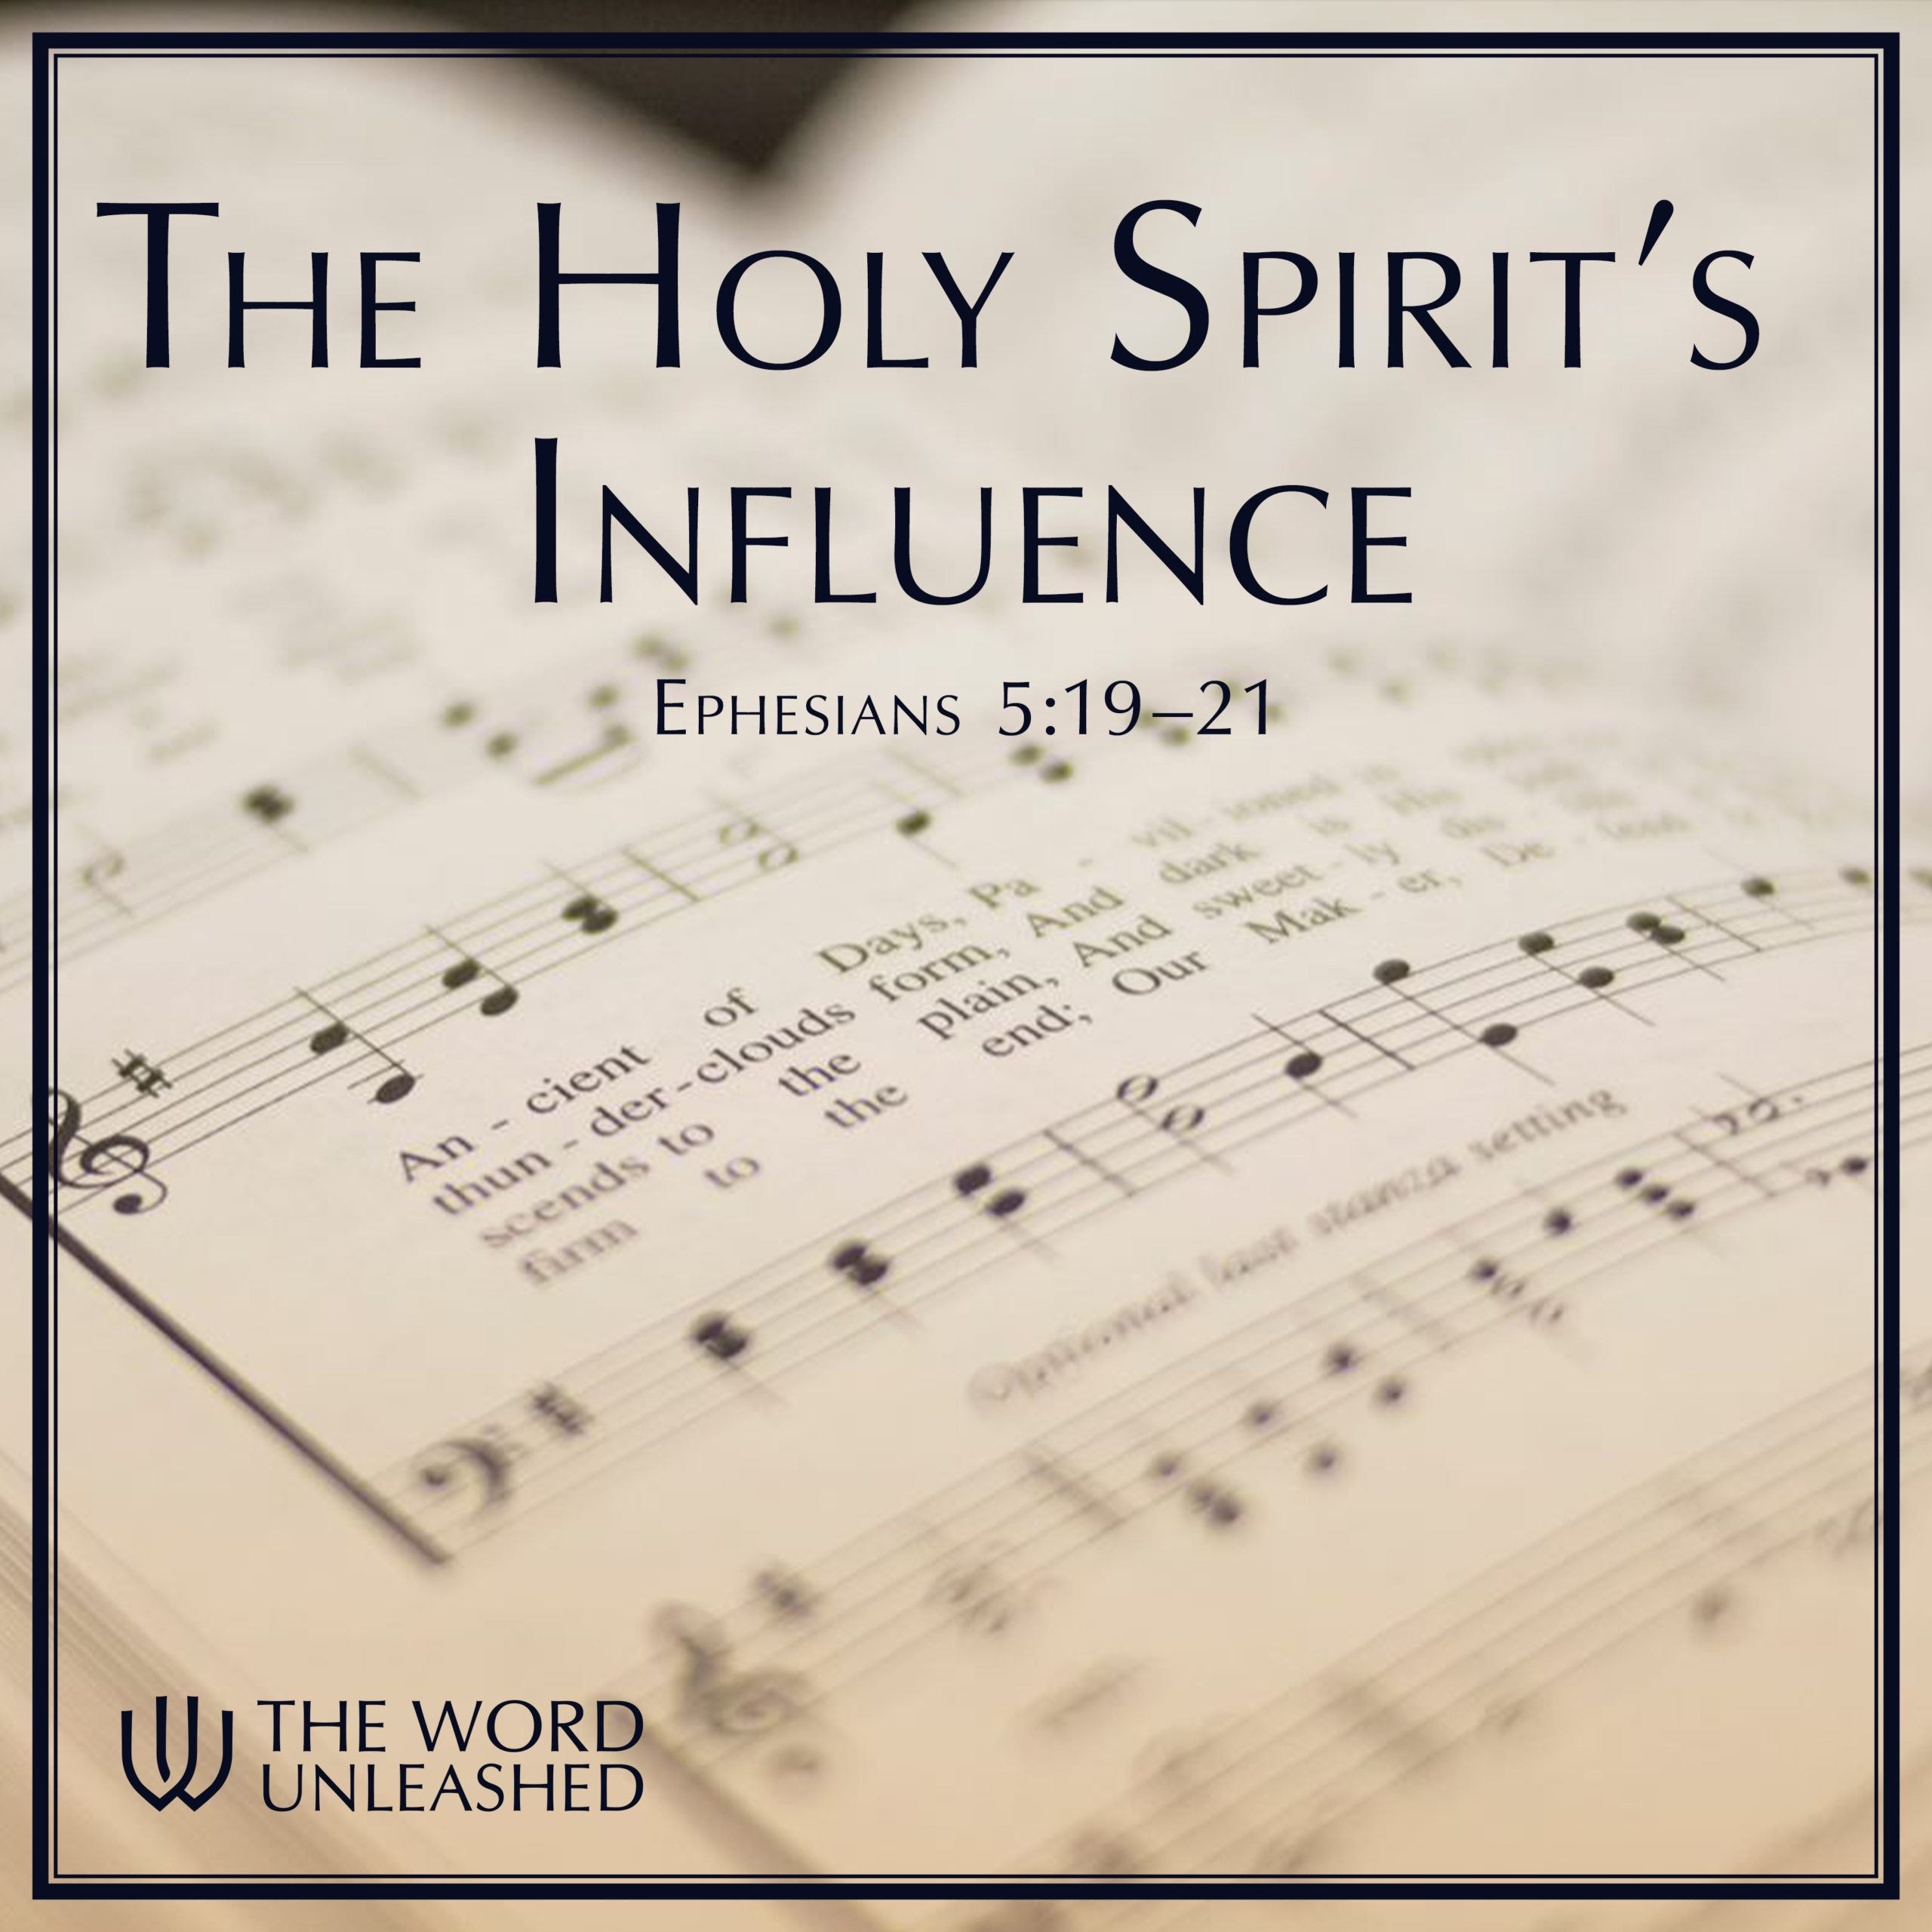 The Holy Spirit's Influence: Three Primary Effects